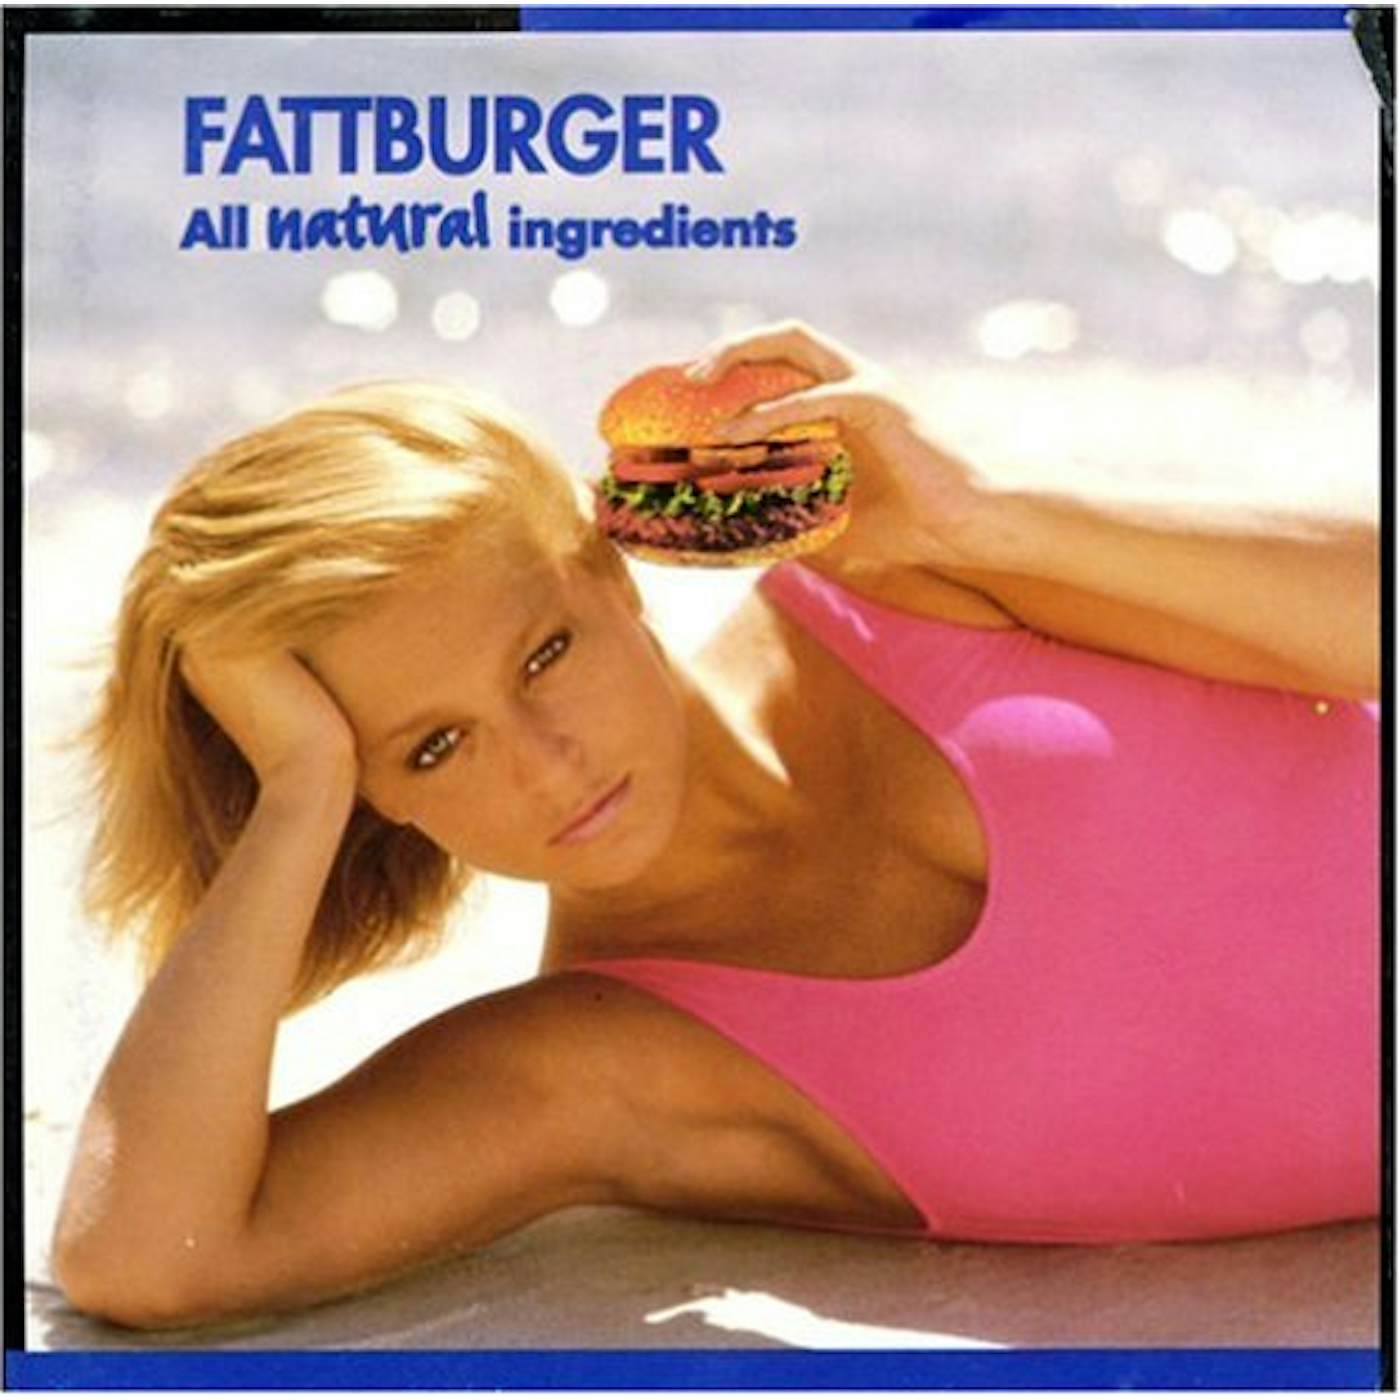 Fattburger ALL NATURAL INGREDIENTS CD